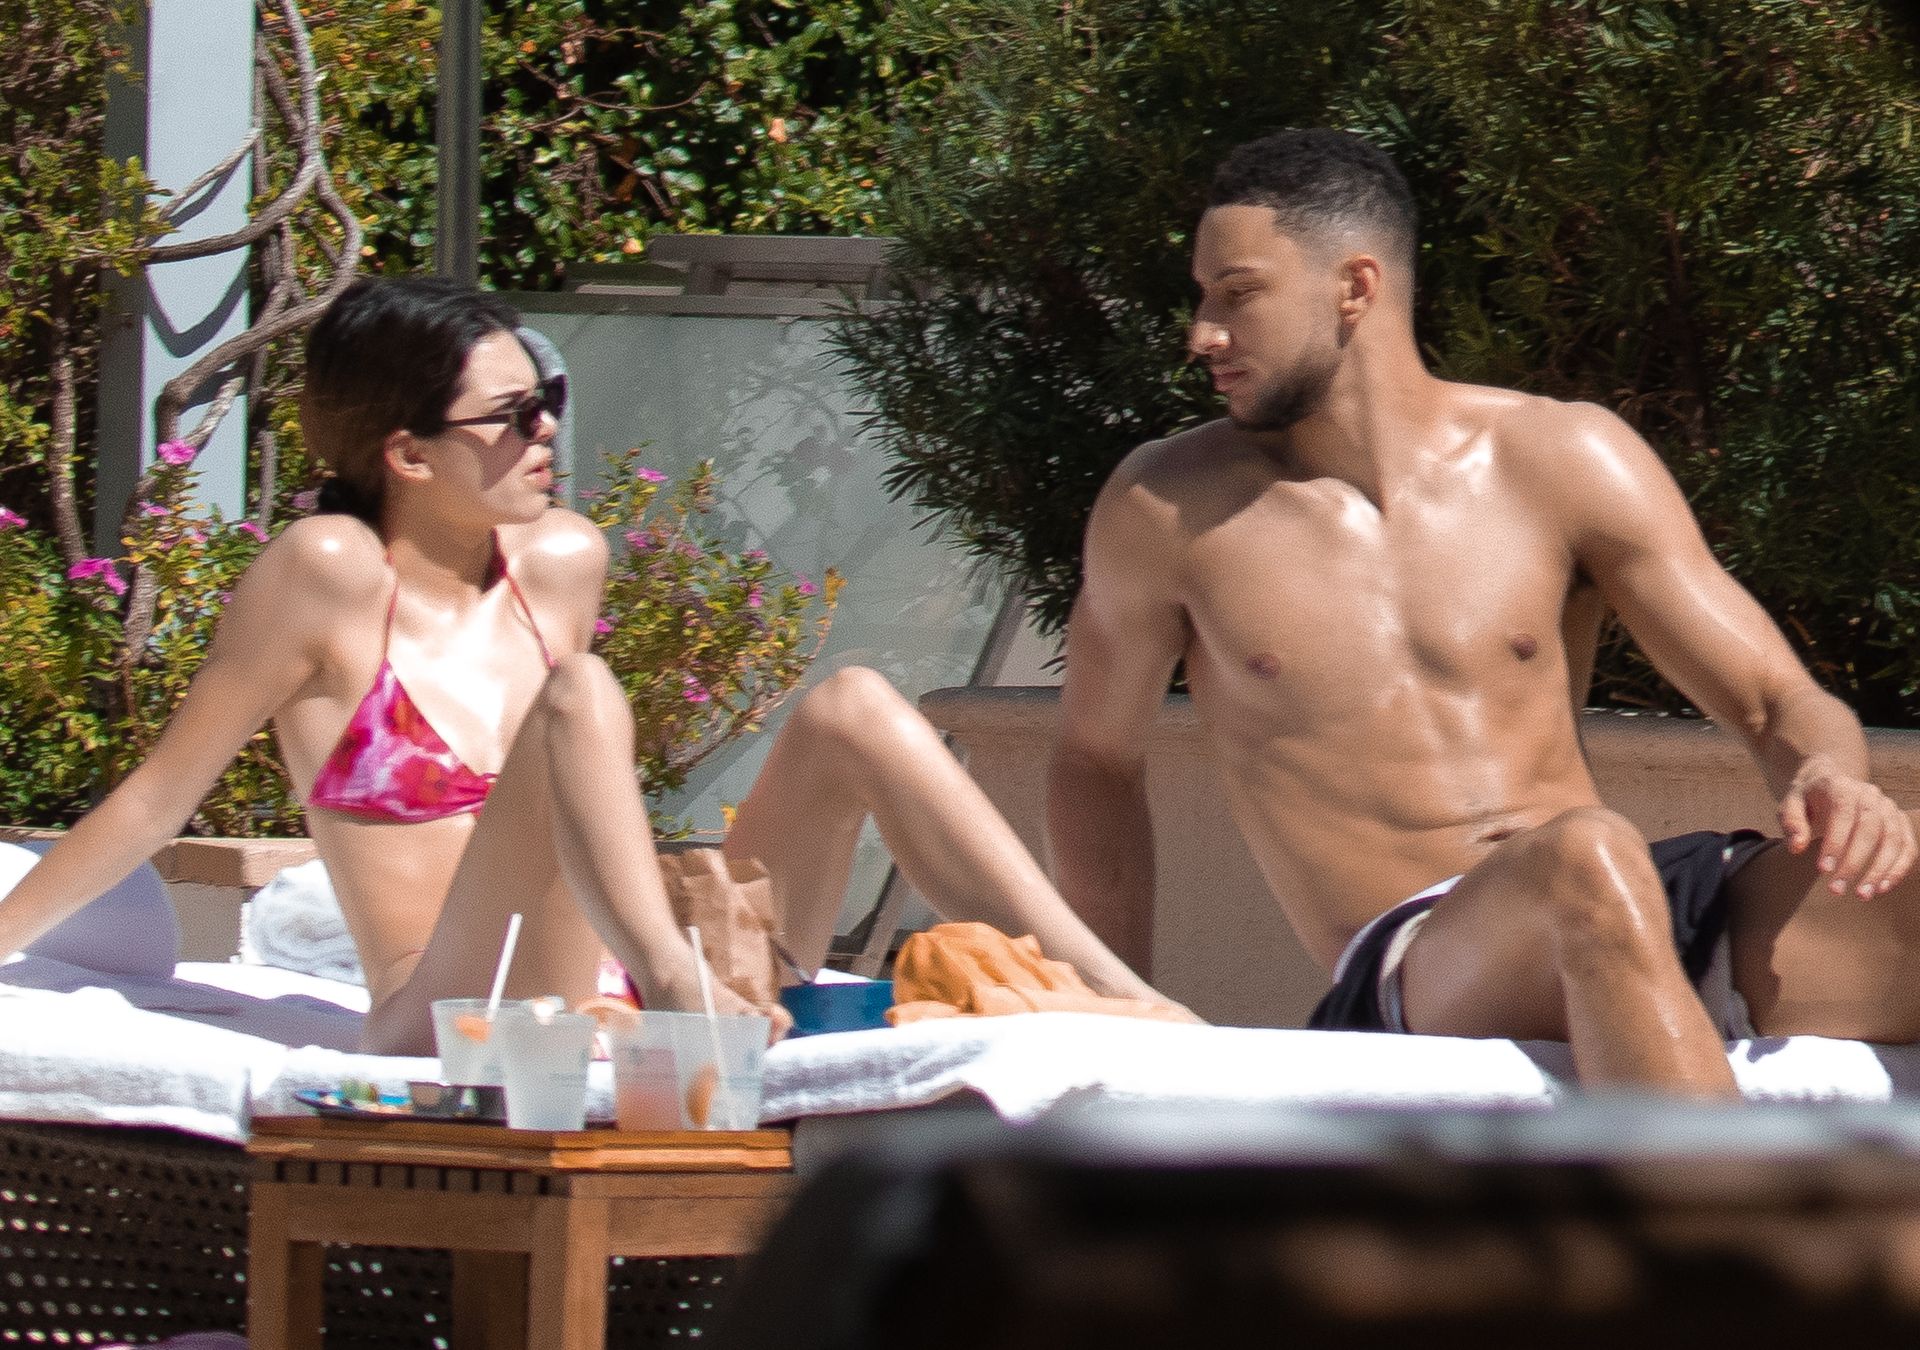 Hot Couple Kendall Jenner & Ben Simmons Relax During Pool Time In Miami (14 Photos)